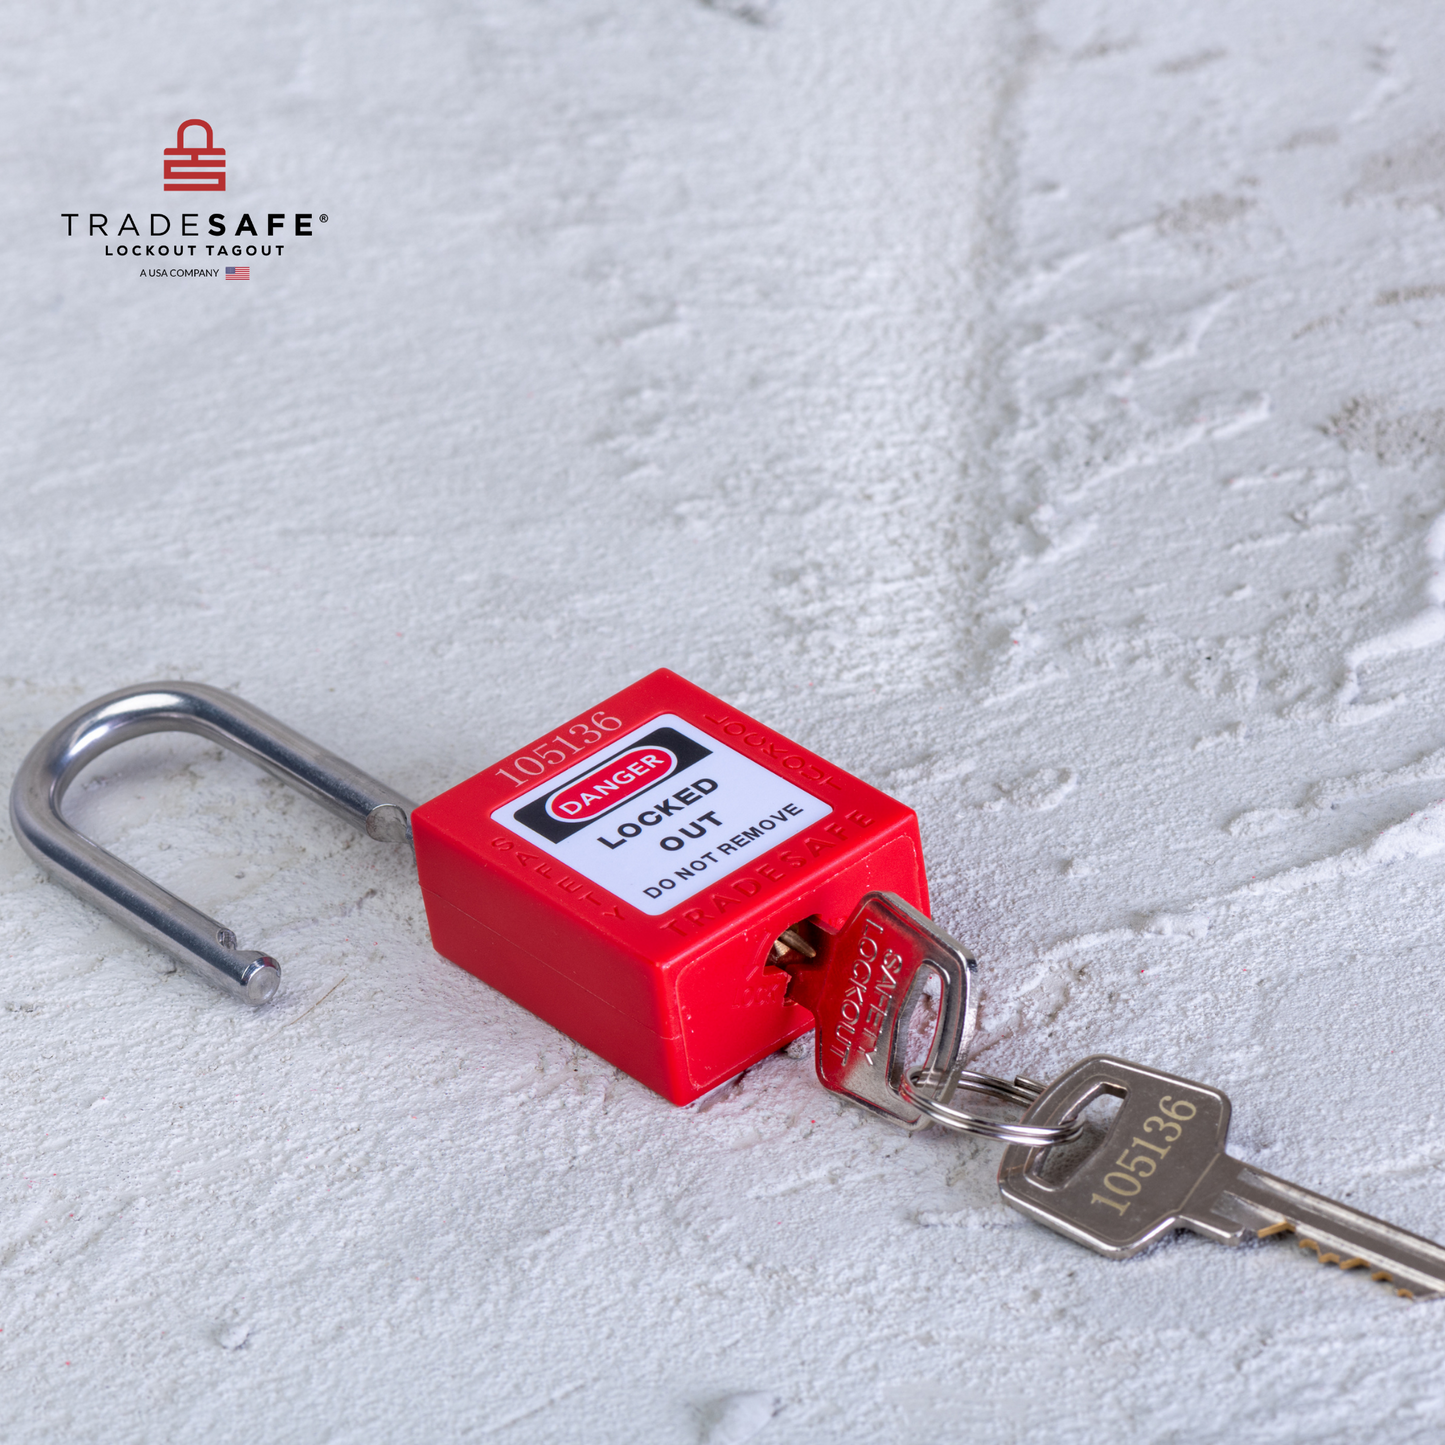 a red loto padlock with 2 keys, 1 key inserted, lying down in a concrete floor